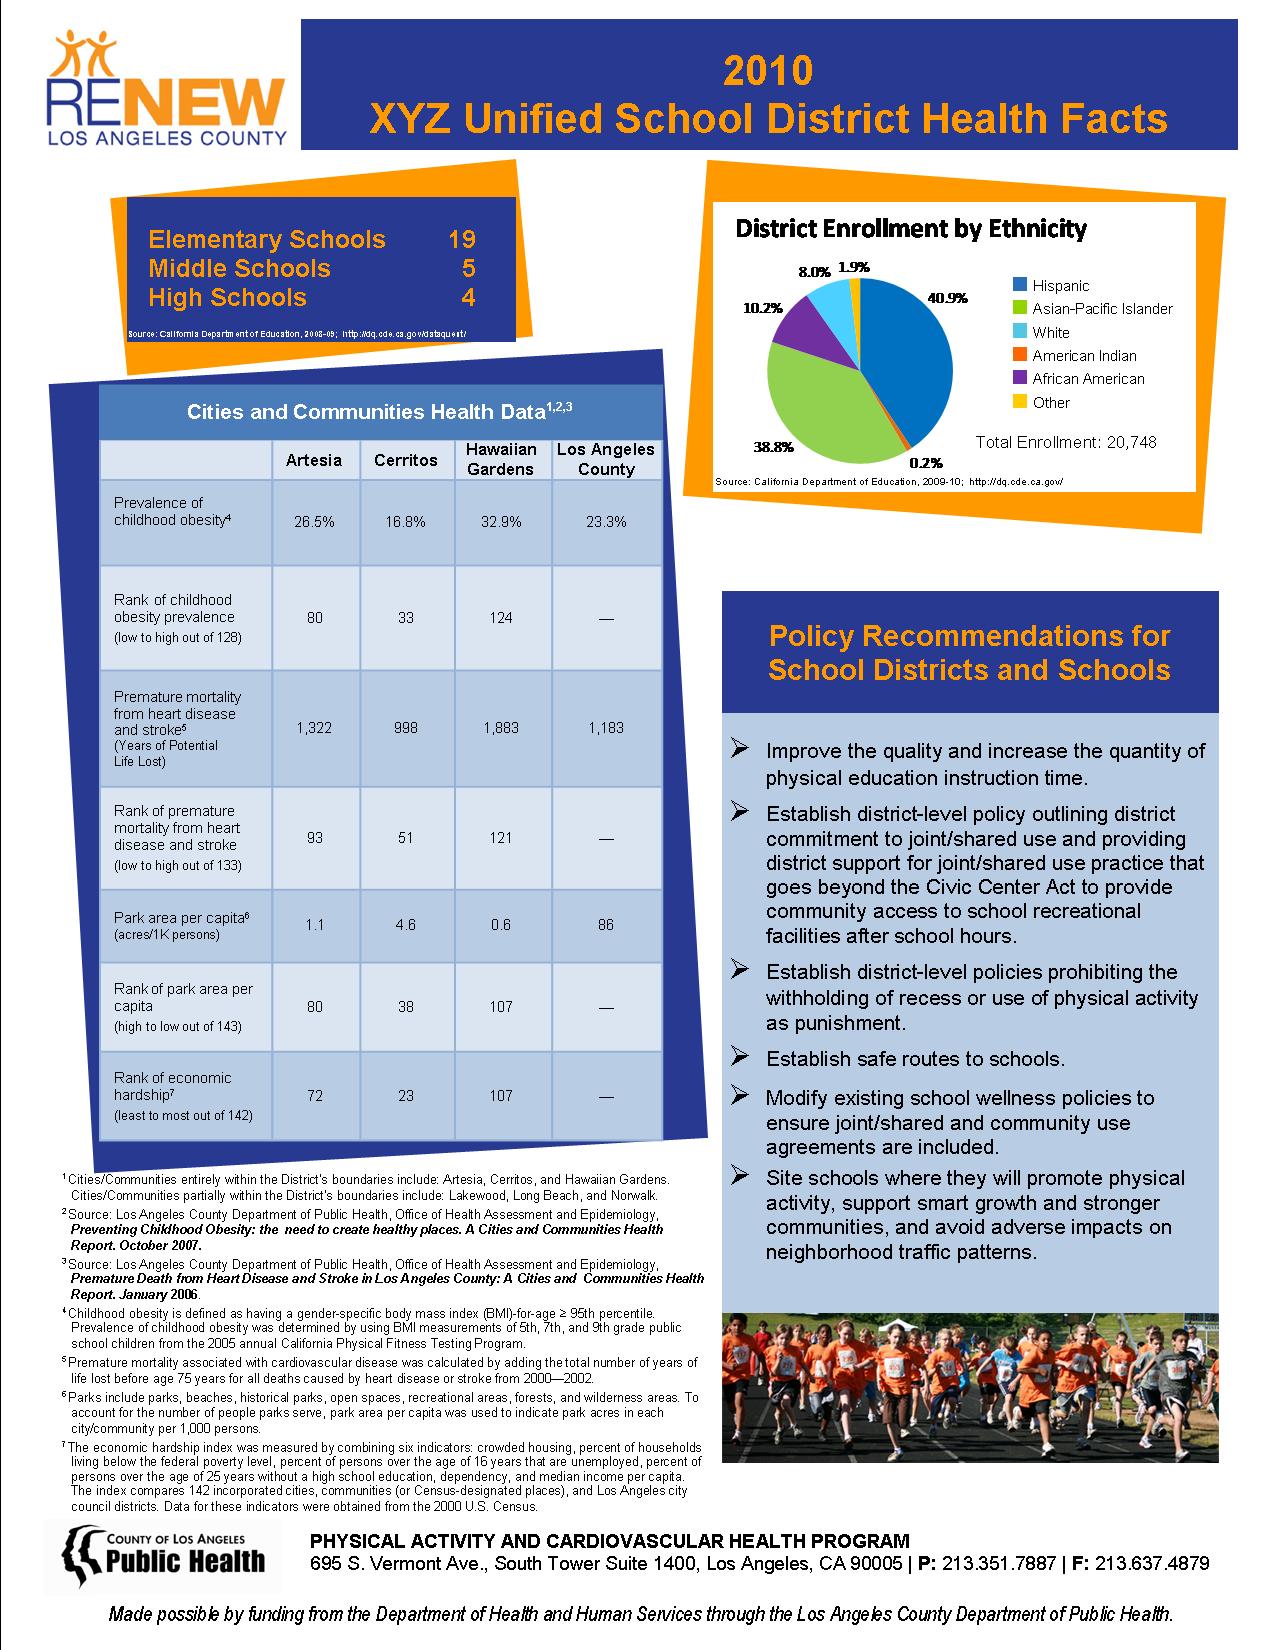 Health Fact Sheet Template from publichealth.lacounty.gov